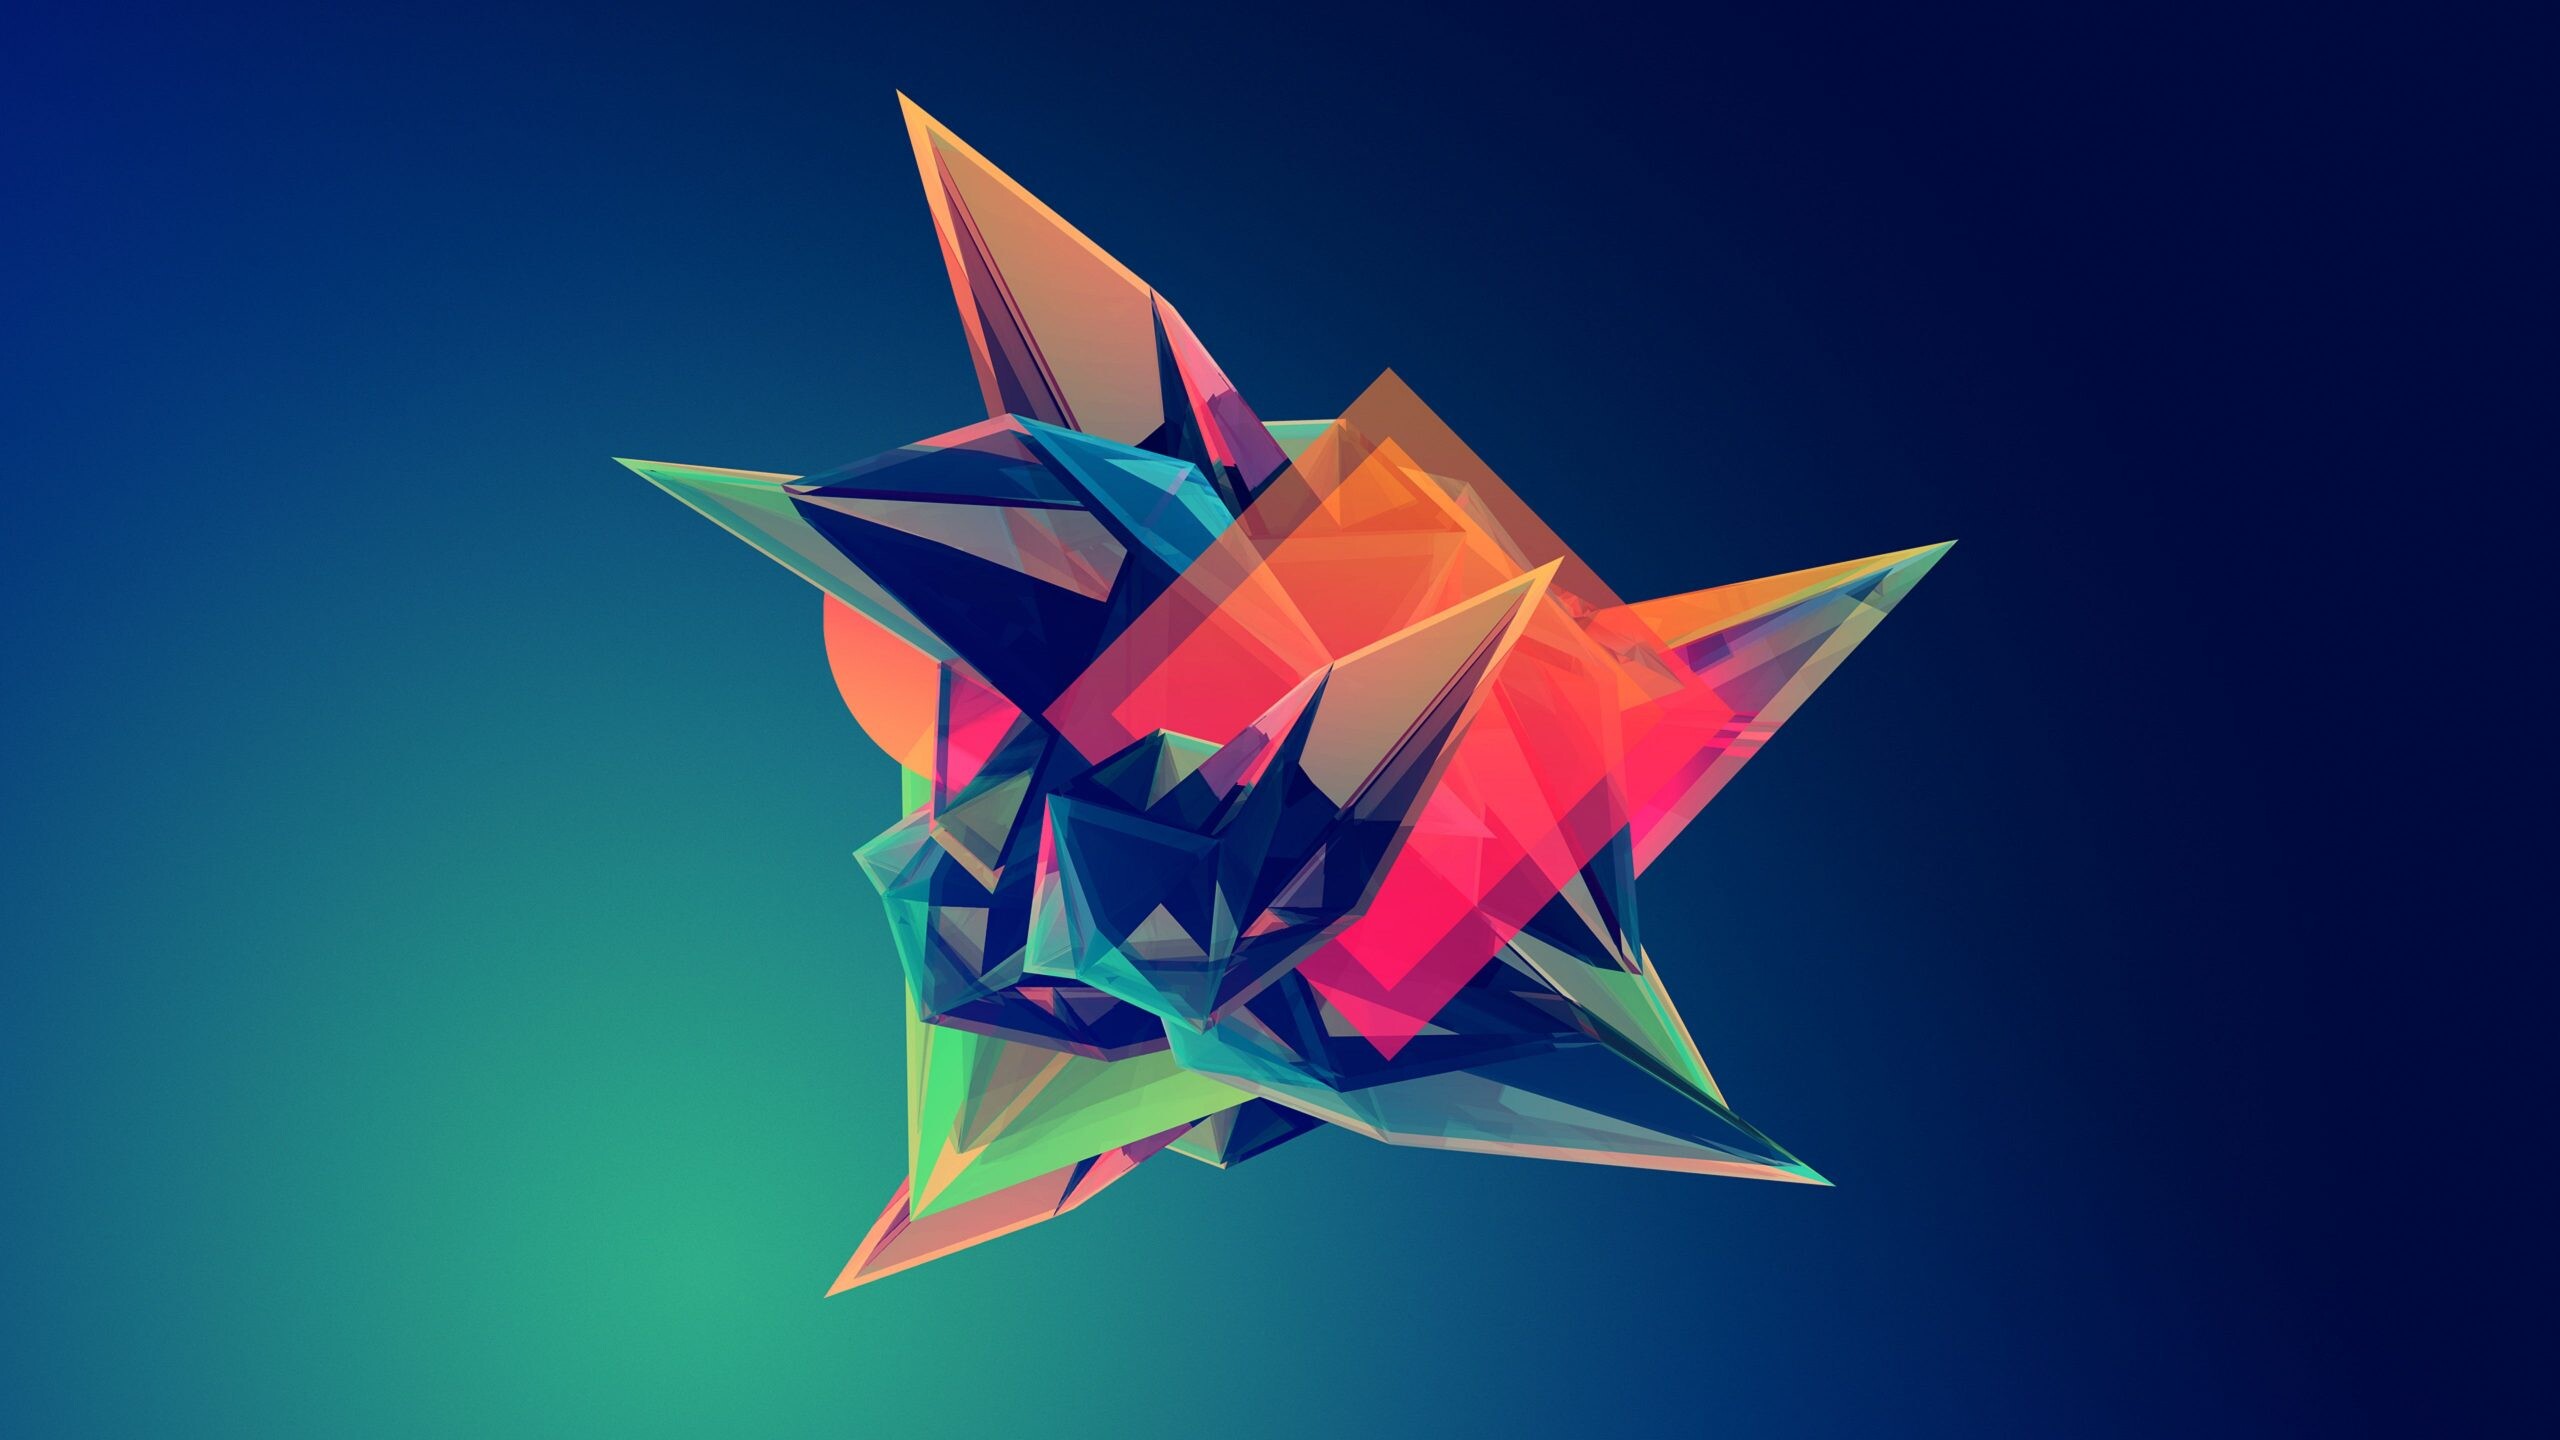 Geometry: Abstract polygonal figures, Wedges, Sharp angles. 2560x1440 HD Wallpaper.